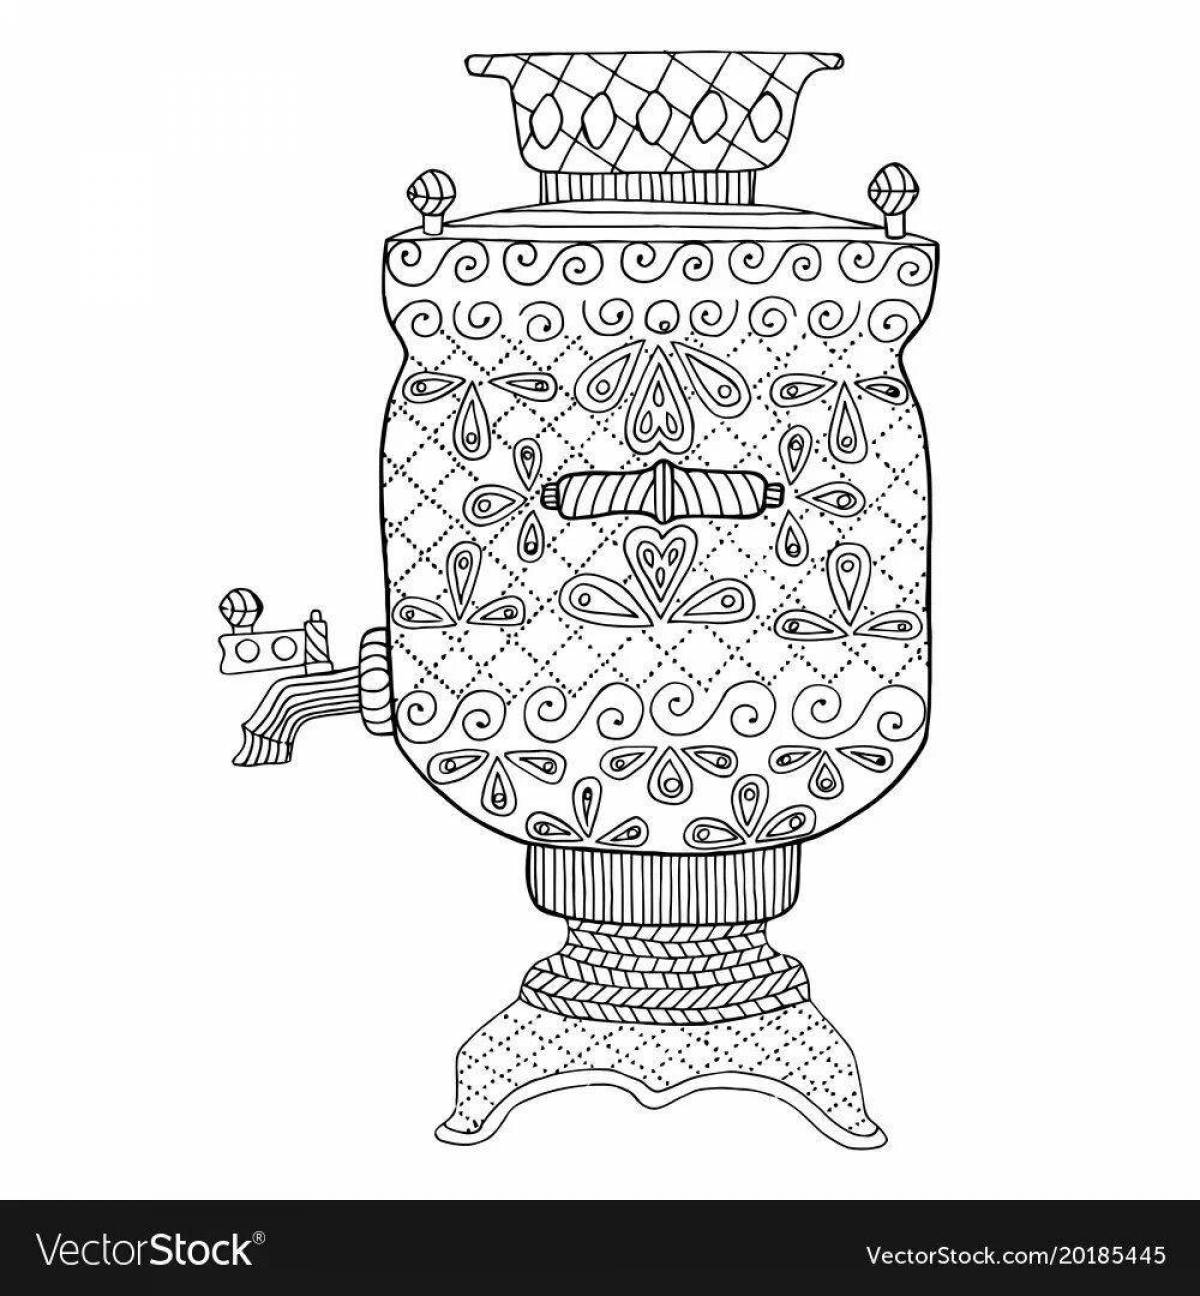 A fascinating samovar coloring book for children 5-6 years old